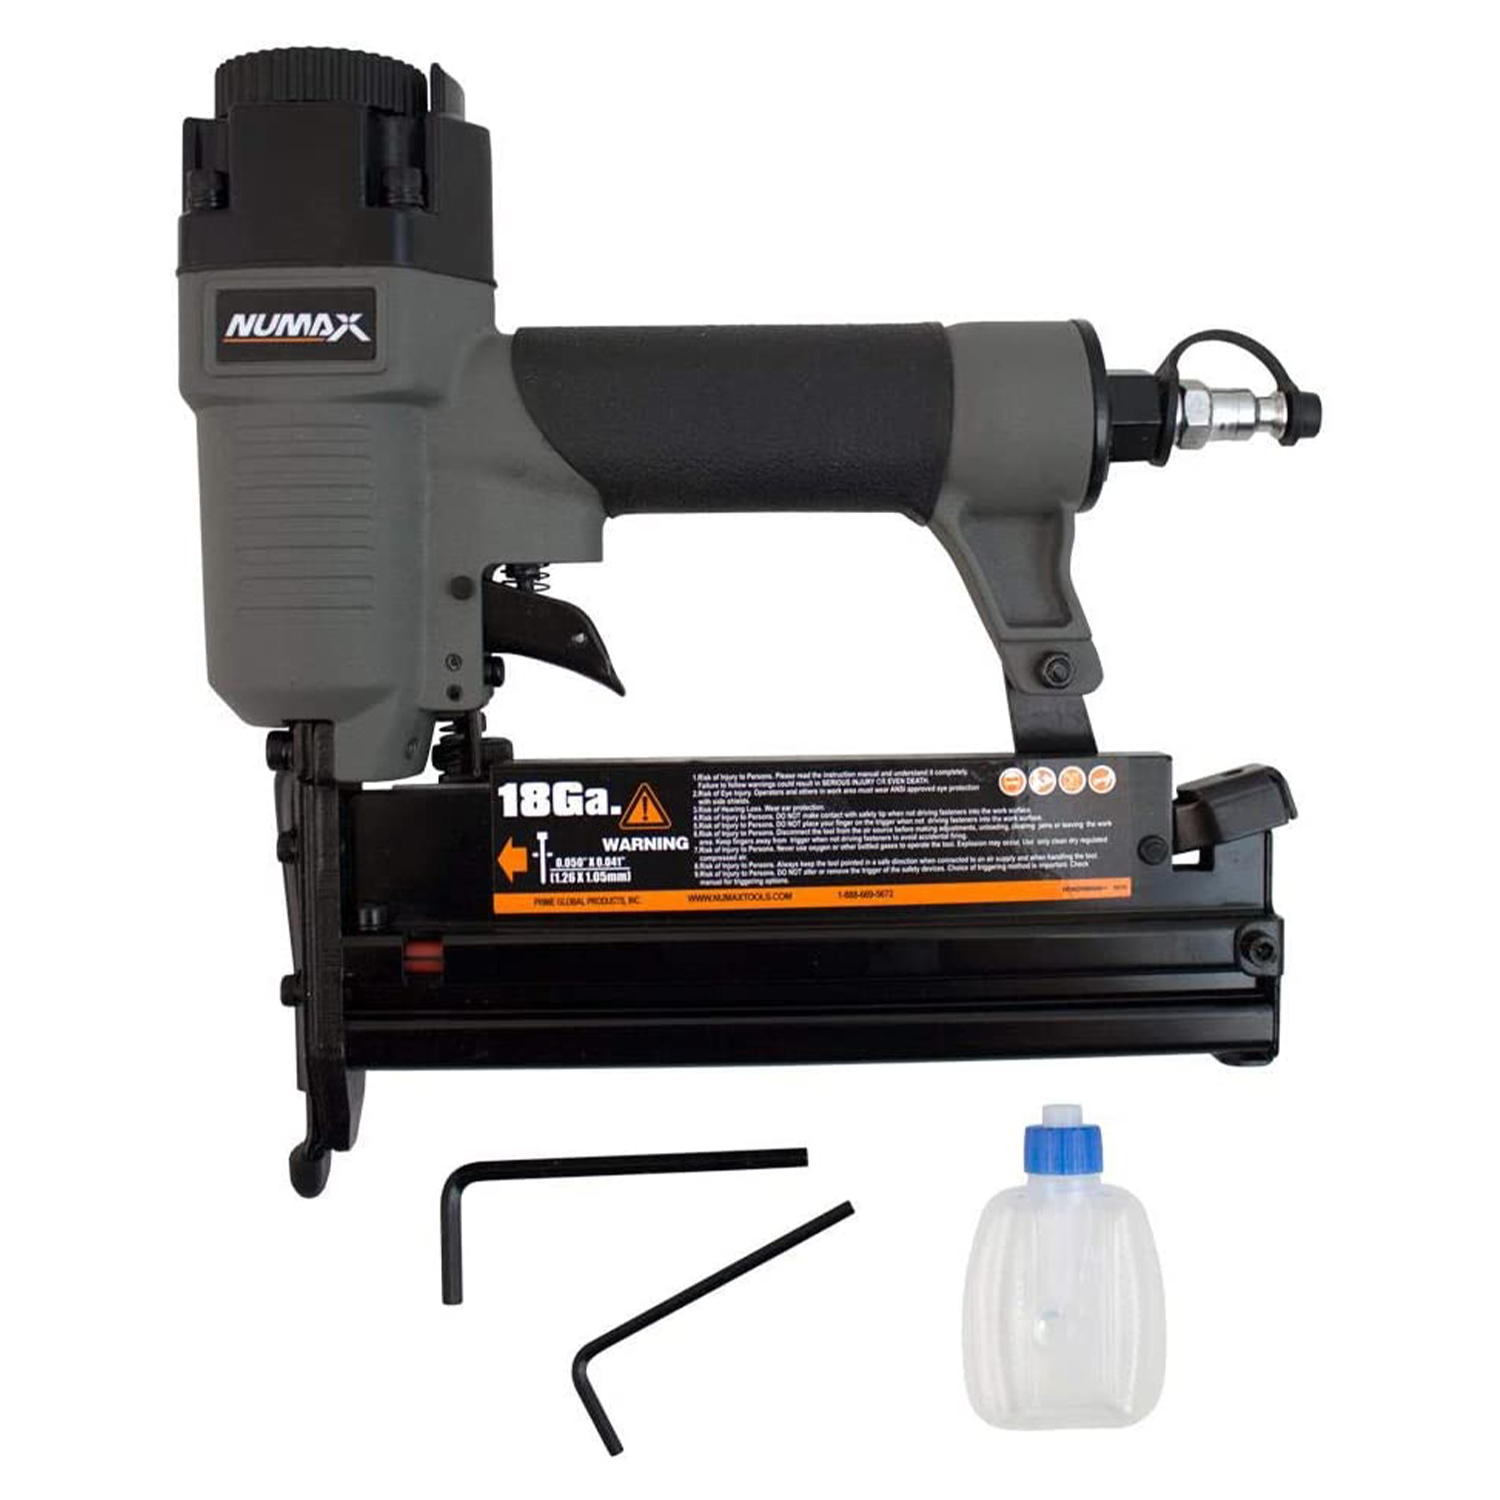 NuMax SL31 Pneumatic 3-in-1 16 and 18 Gauge 2 Inches Finish Nailer and Stapler - image 1 of 8